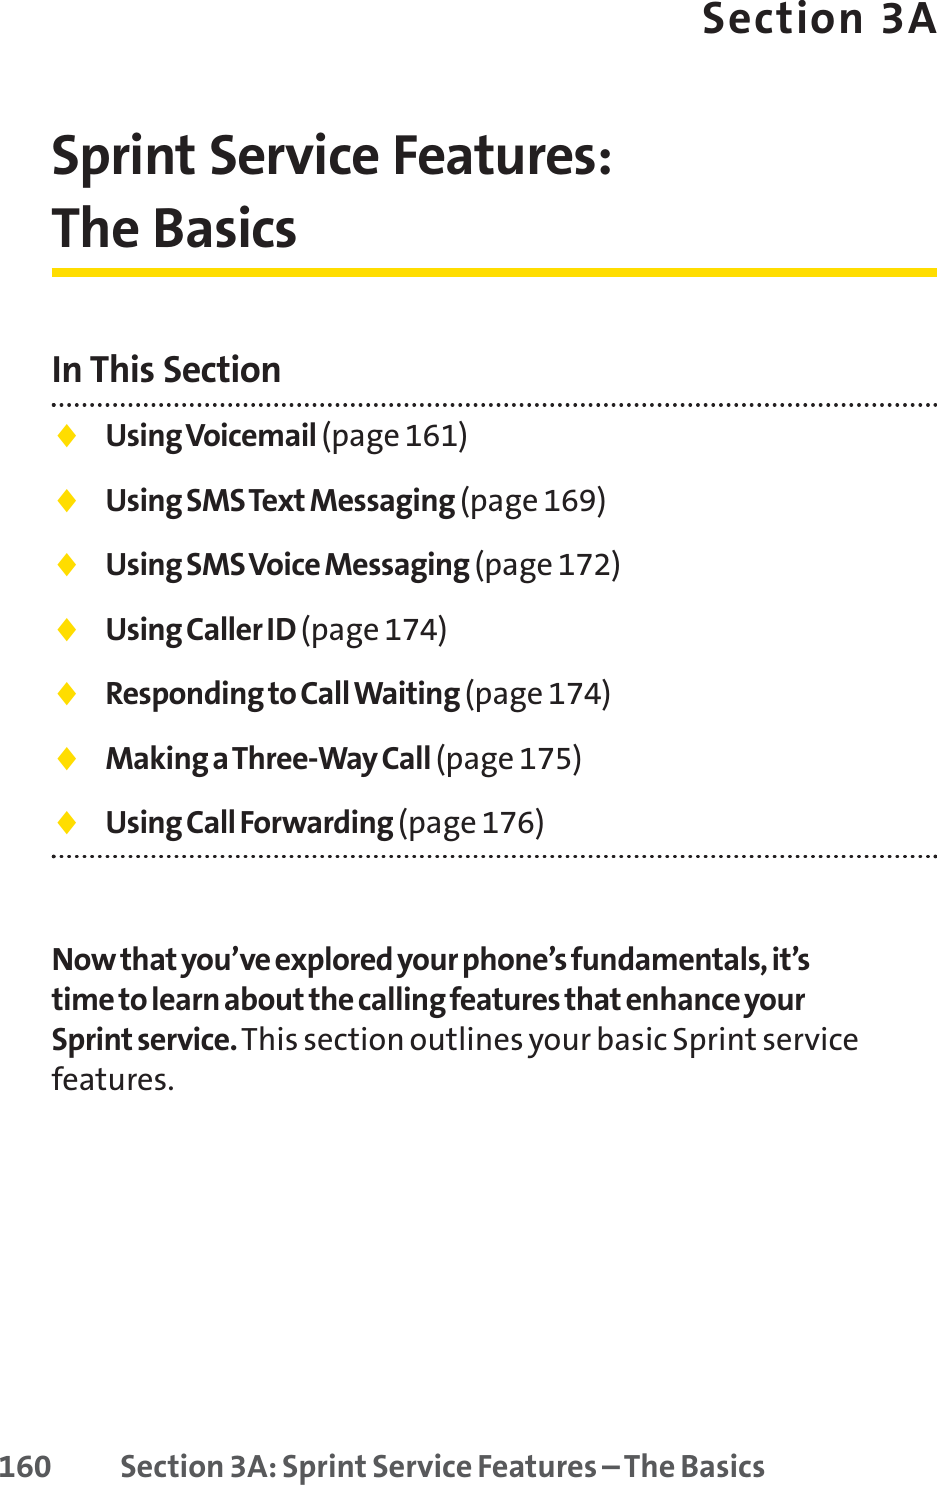 160 Section 3A: Sprint Service Features – The BasicsSection 3ASprint Service Features: The BasicsIn This Section⽧Using Voicemail (page 161)⽧Using SMS Text Messaging (page 169)⽧Using SMS Voice Messaging (page 172)⽧Using Caller ID (page 174)⽧Responding to Call Waiting (page 174)⽧Making a Three-Way Call (page 175)⽧Using Call Forwarding (page 176)Now that you’ve explored your phone’s fundamentals, it’stime to learn about the calling features that enhance yourSprint service.This section outlines your basic Sprint servicefeatures.